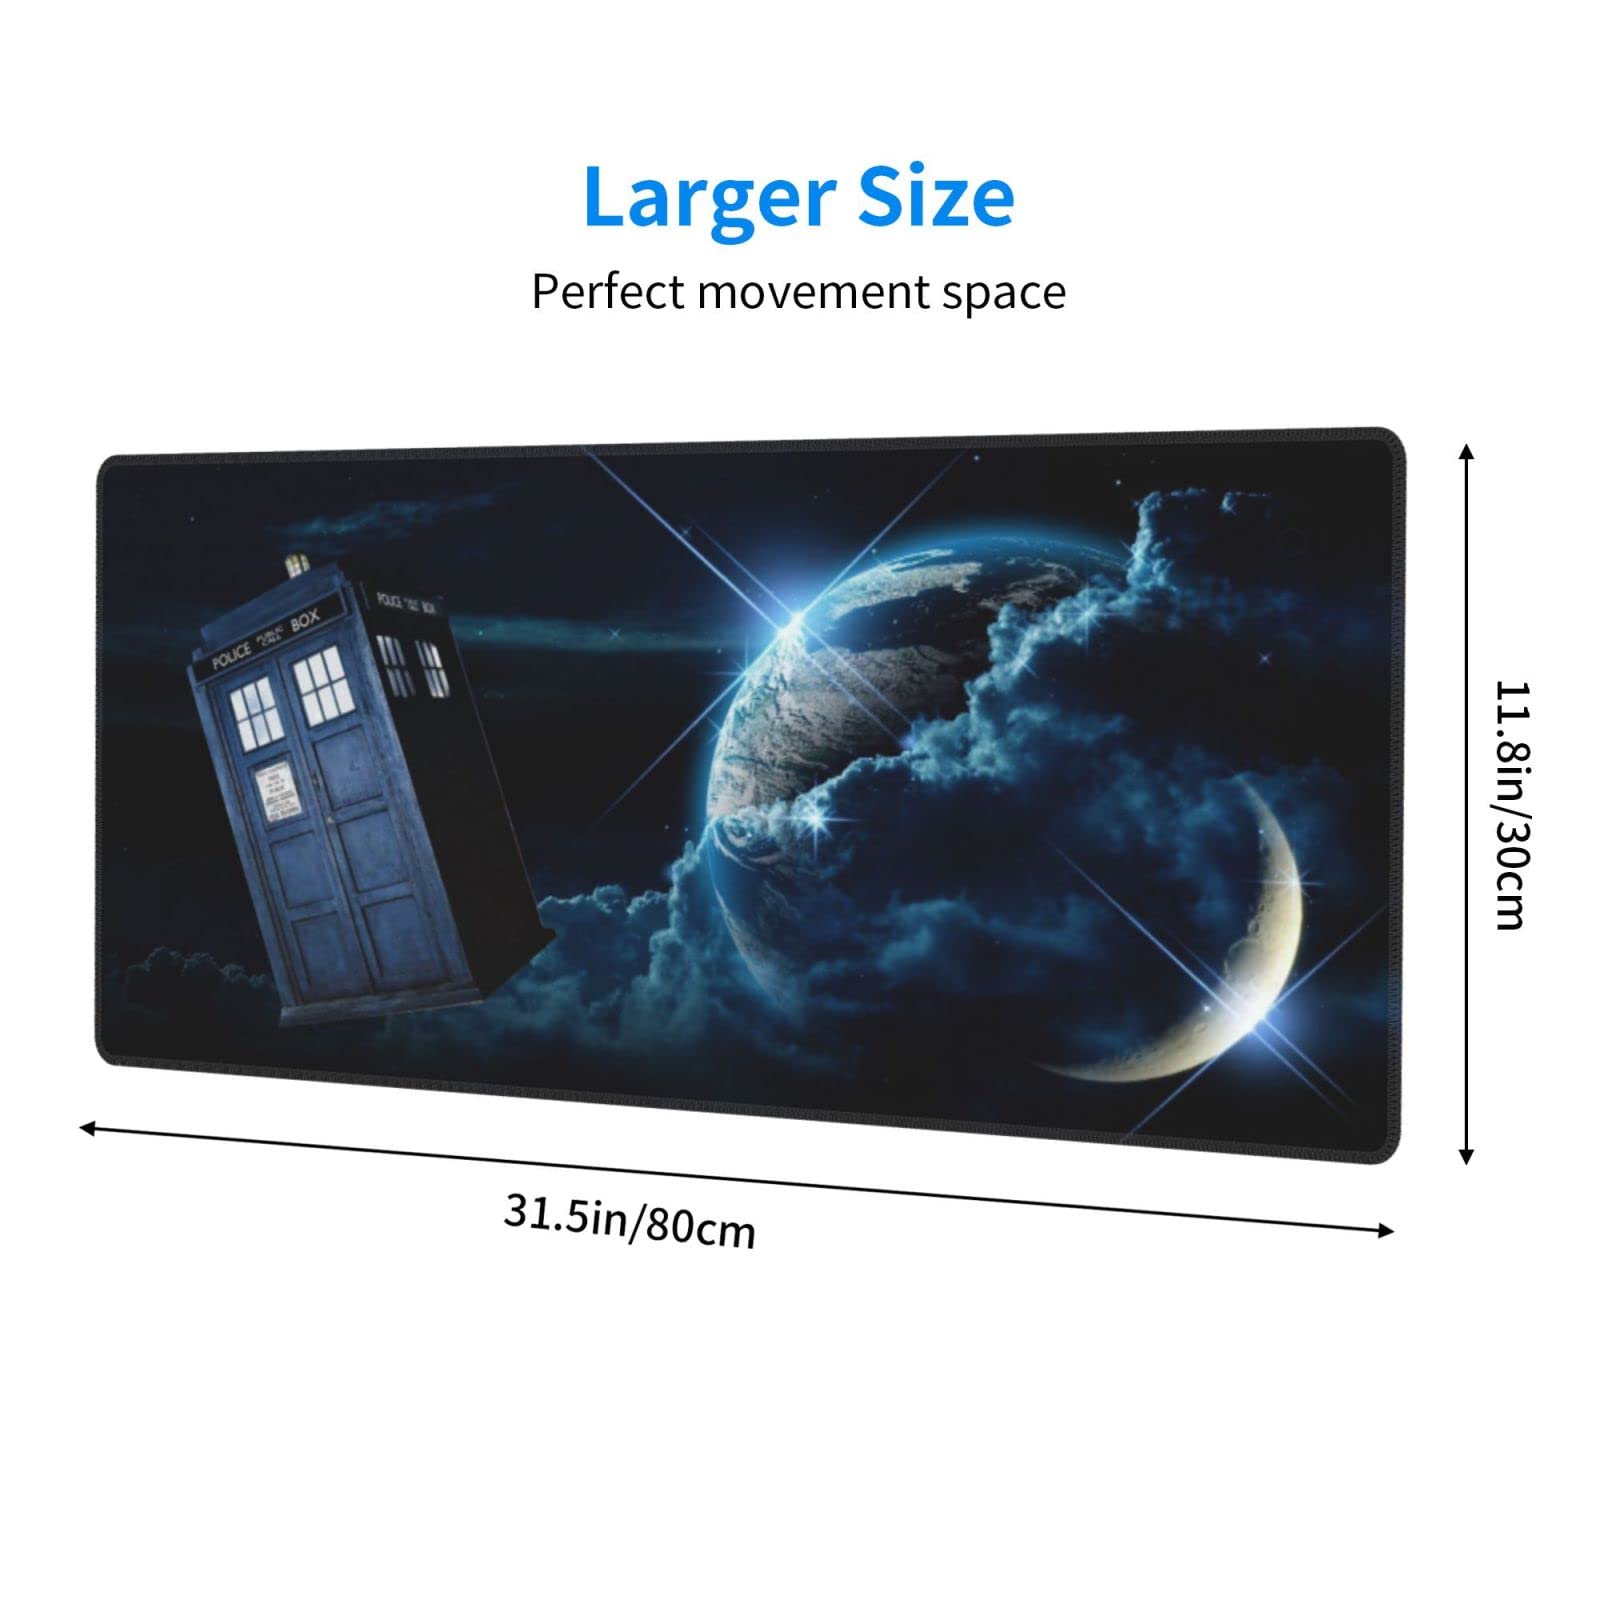 Mouse Pad 11.8x31.5 Protector Anime Rectangle Waterproof Oversized Dining Table Mat Gaming Non-Slip Rubber Mat